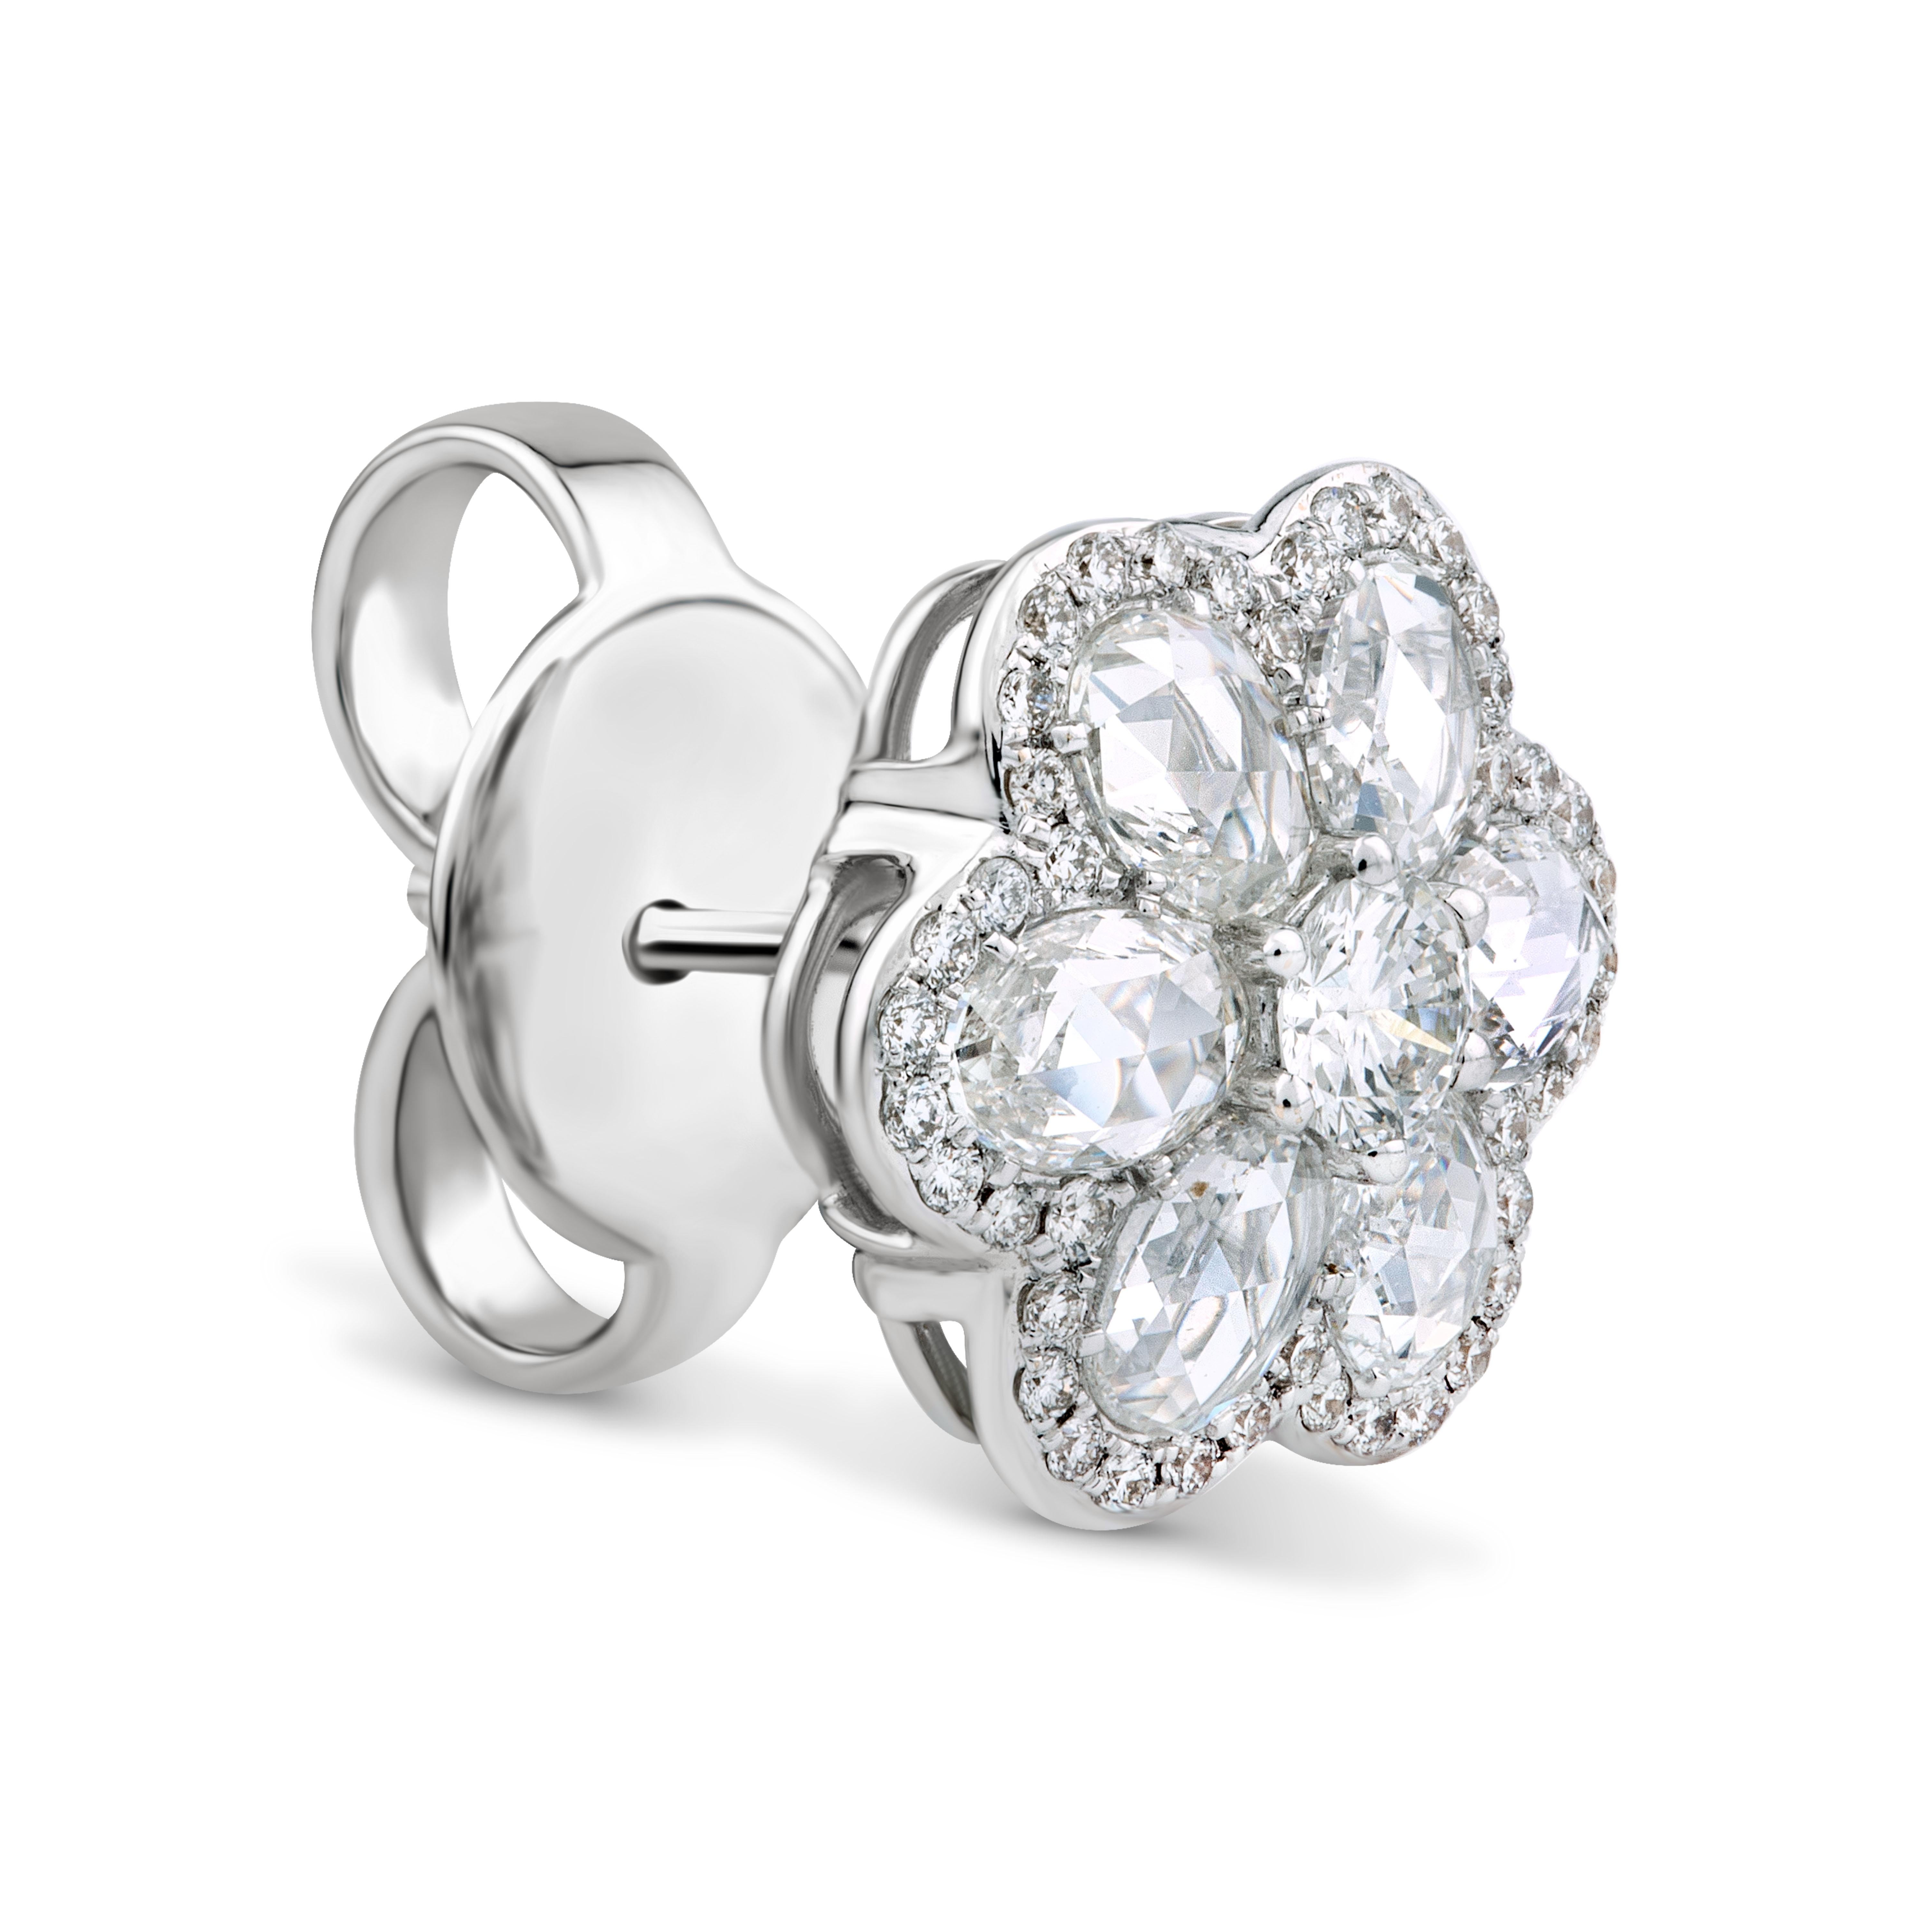 Part of Rarever's 'Blossom' Collection, these ear studs, beautifully crafted and playful in design, celebrate the joys of spring. Combining 12 oval rose cuts with 86 round brilliant cut diamonds for extra sparkle.

Total diamond weight: